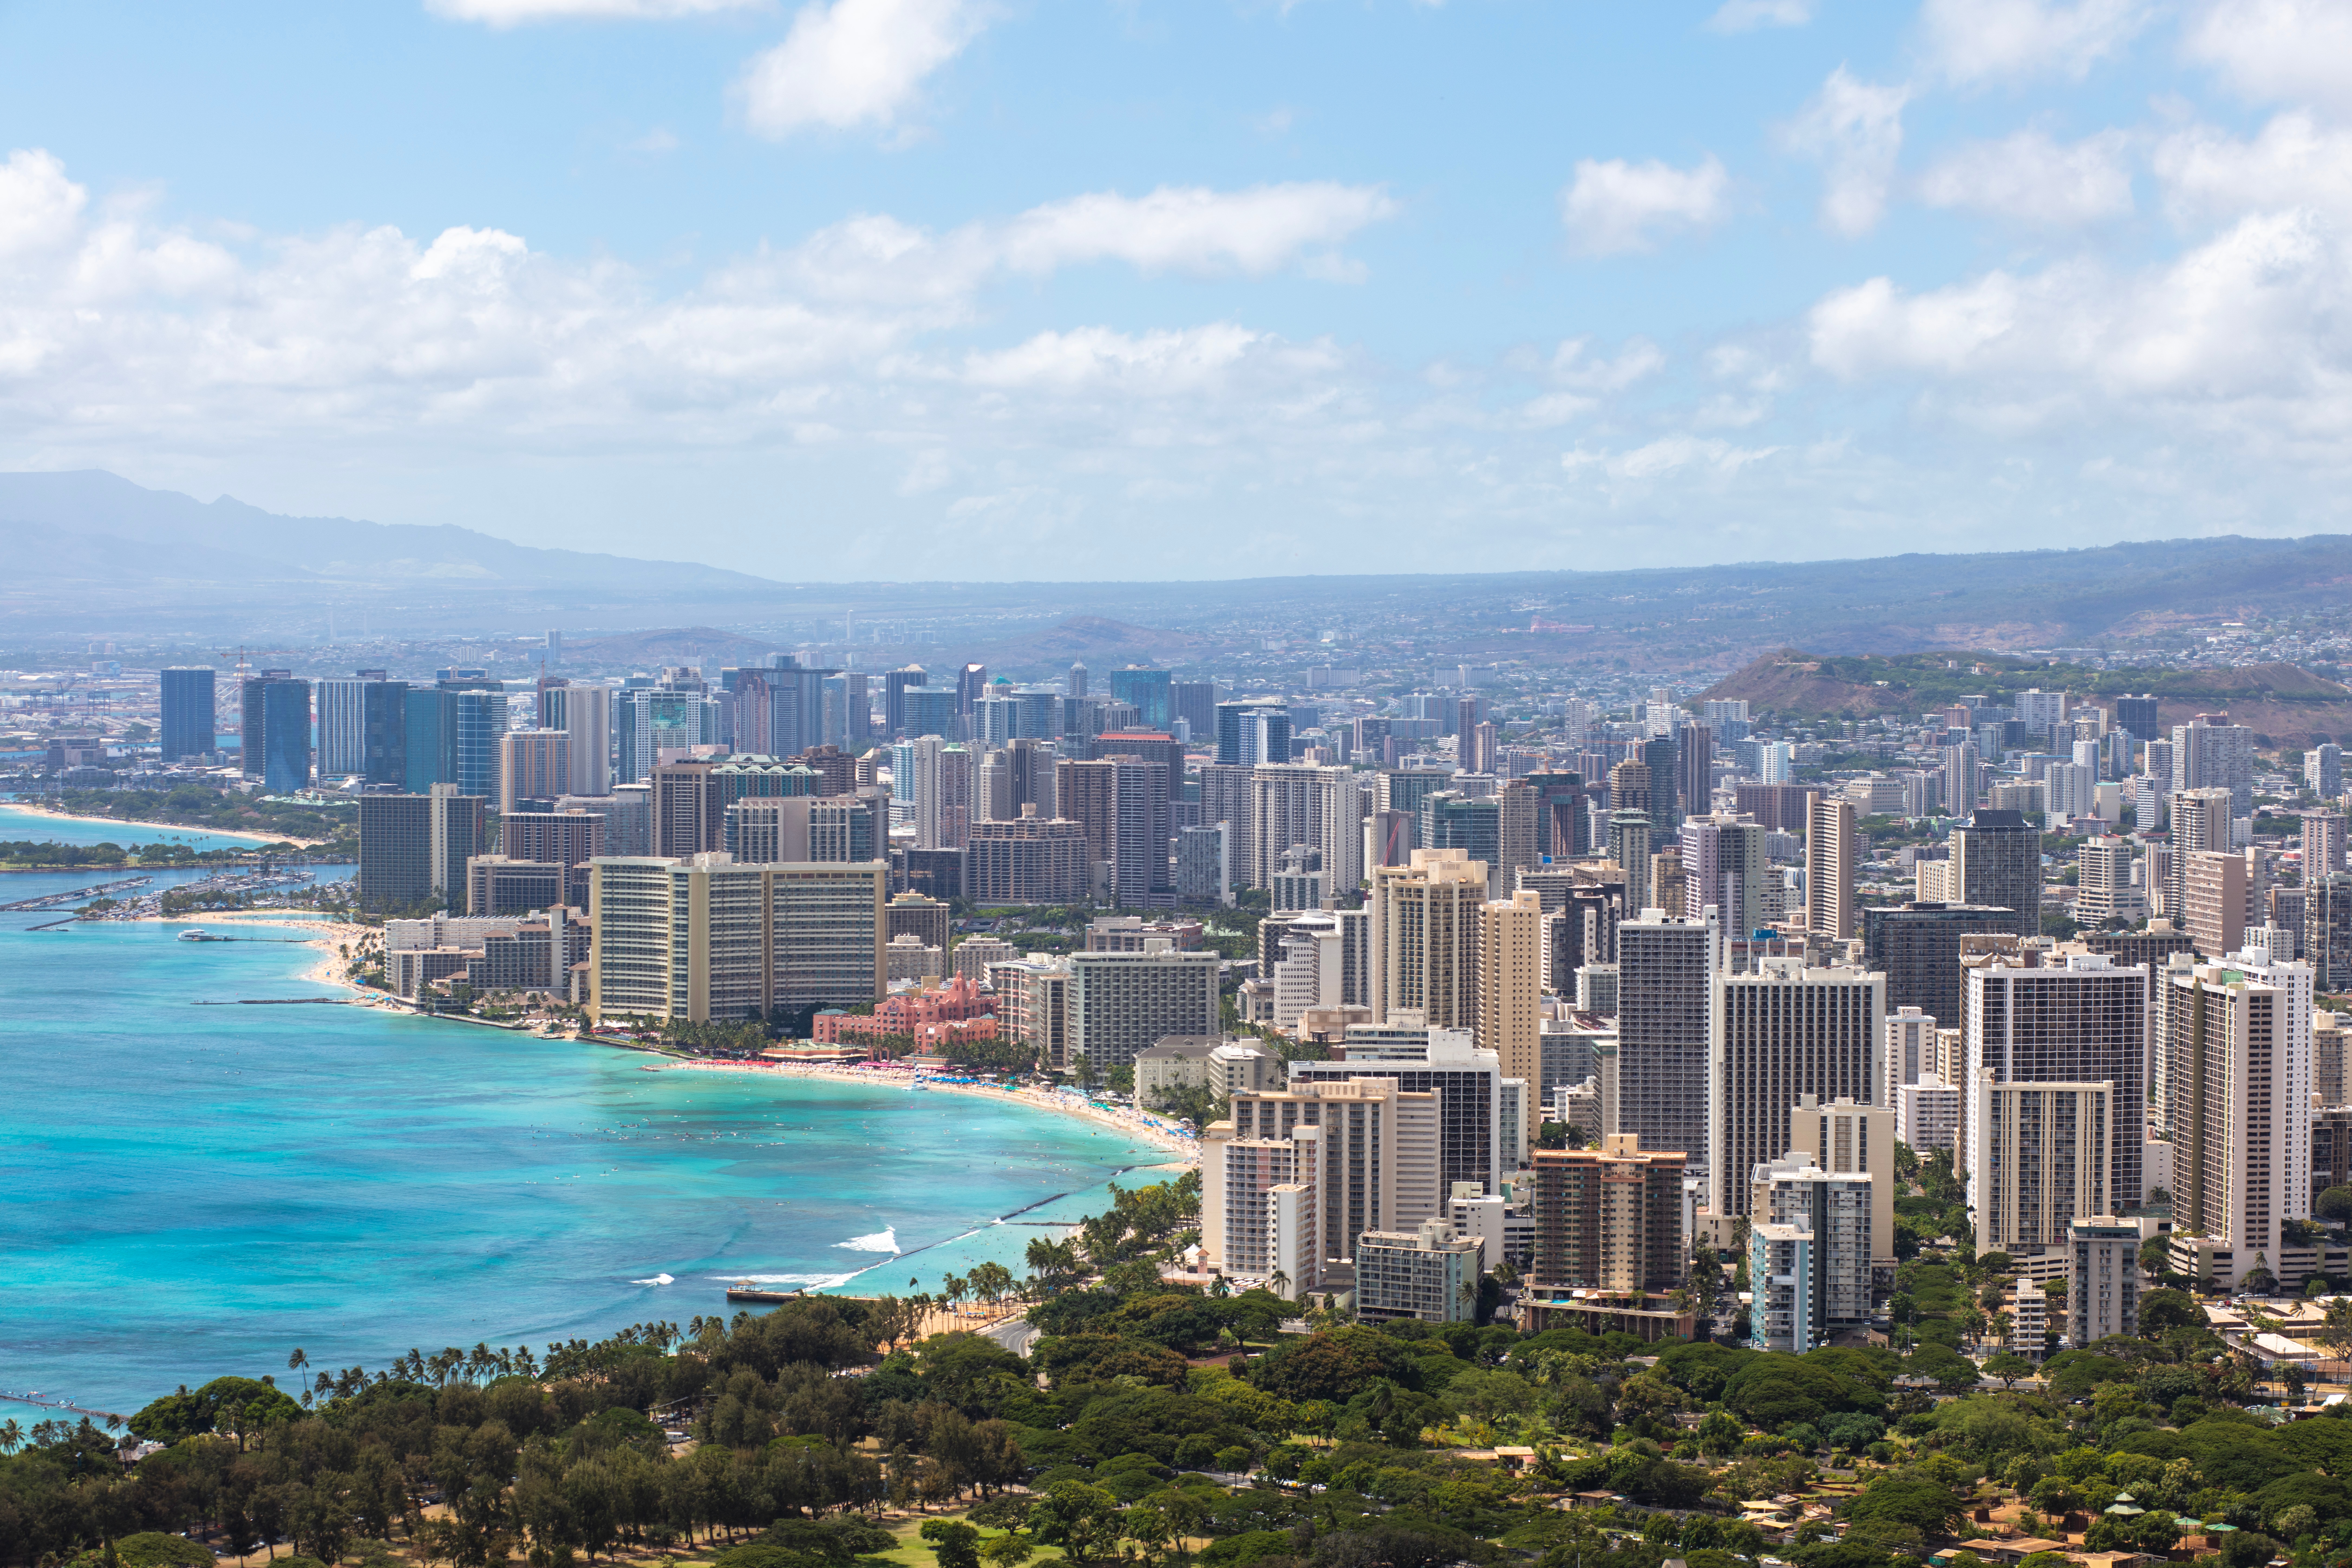 A popular vacation destination and relaxing beach vibes, Honolulu is one of the most expensive cities in the U.S. Pictured: An aerial view of Honolulu, Hawaii